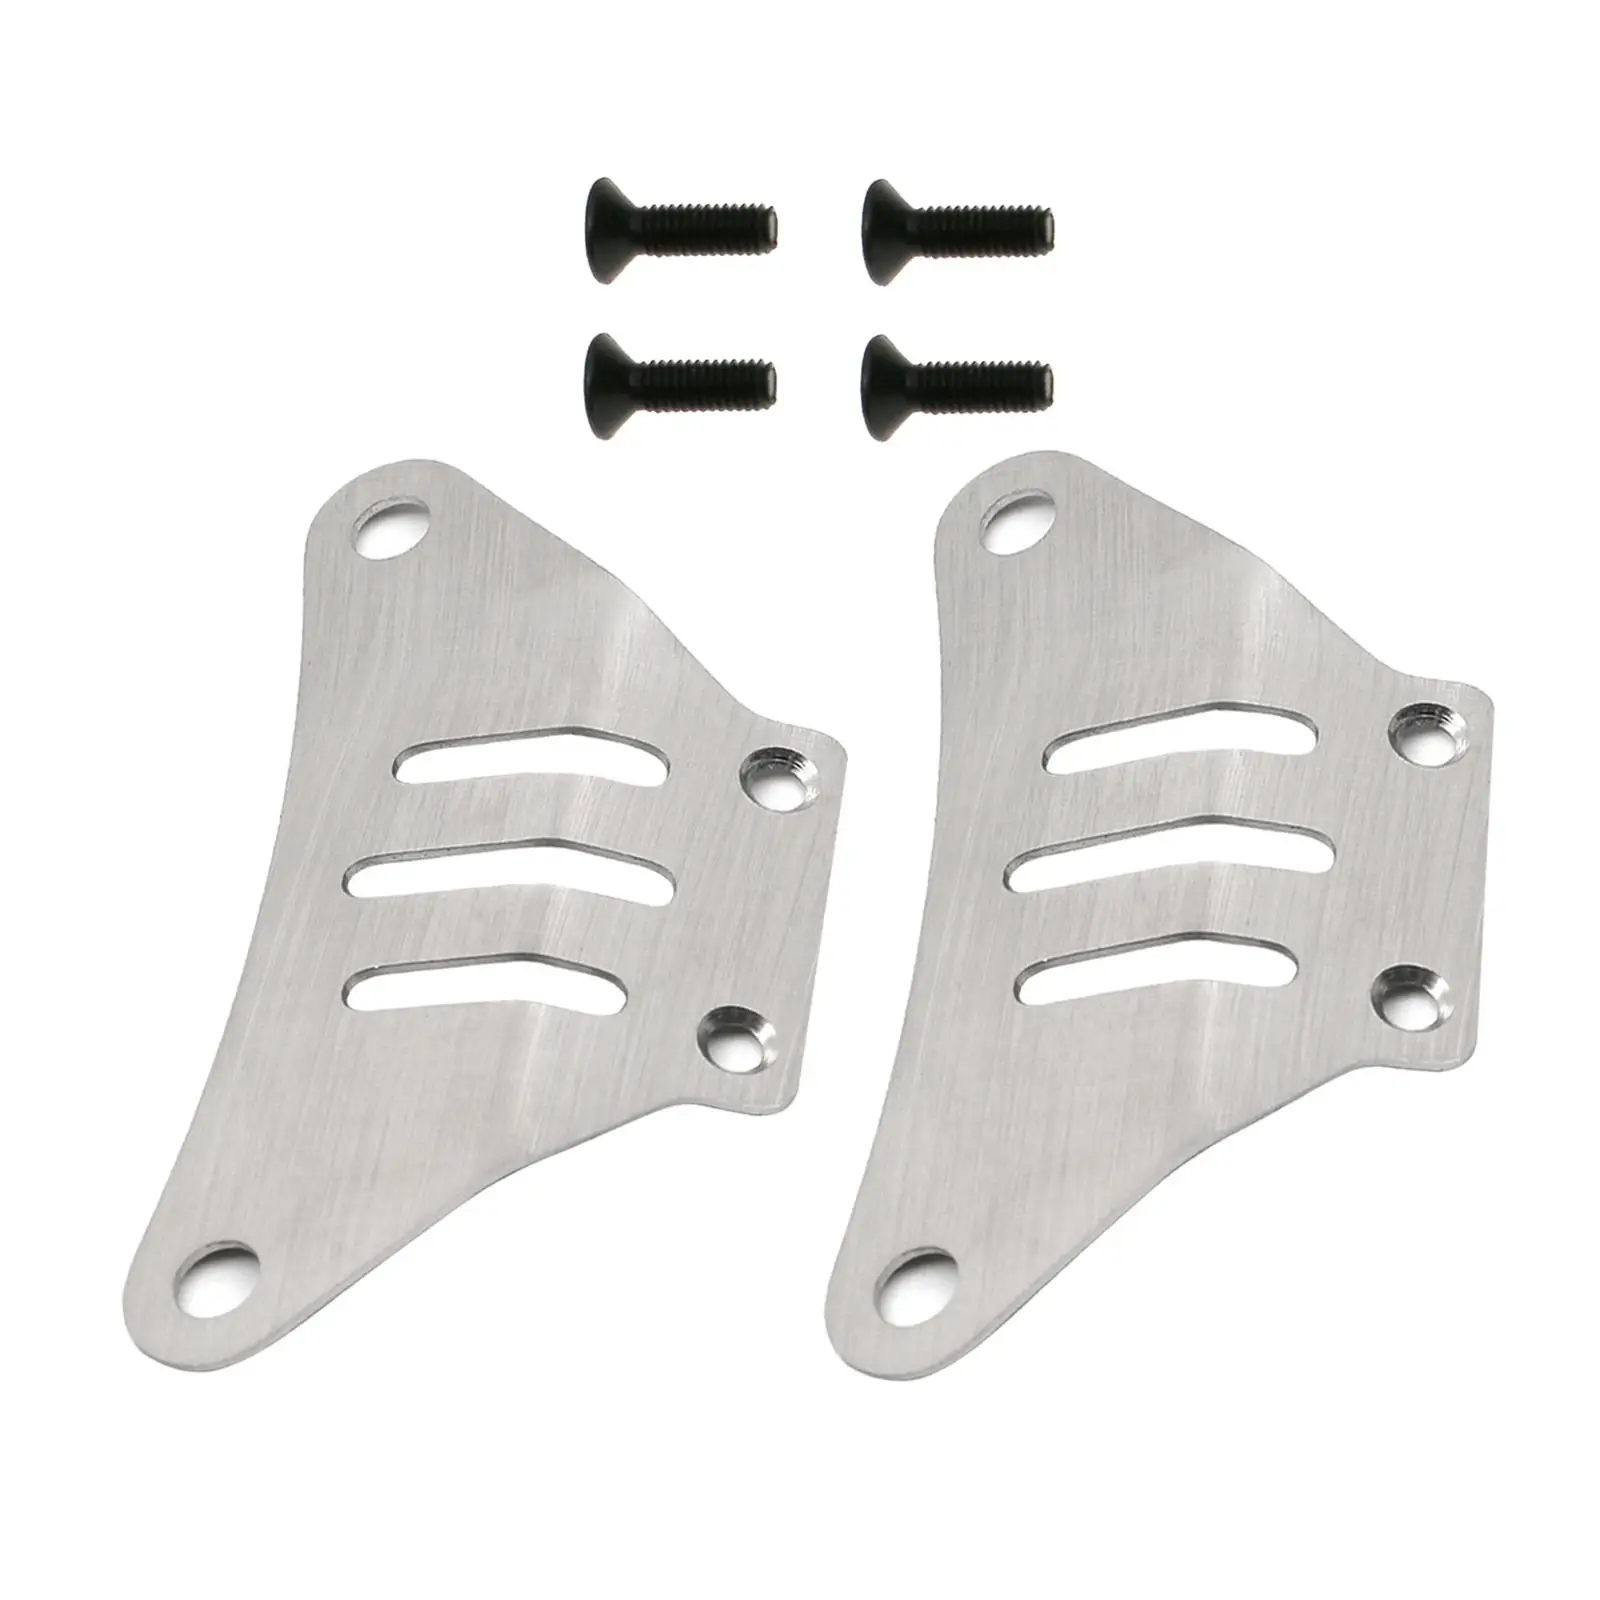 Stainless Steel Front and Rear Guard Boards Upgrade Metal Armor for 1/10 TT02 1:10 Scale RC Car DIY Accessories Replaces Part